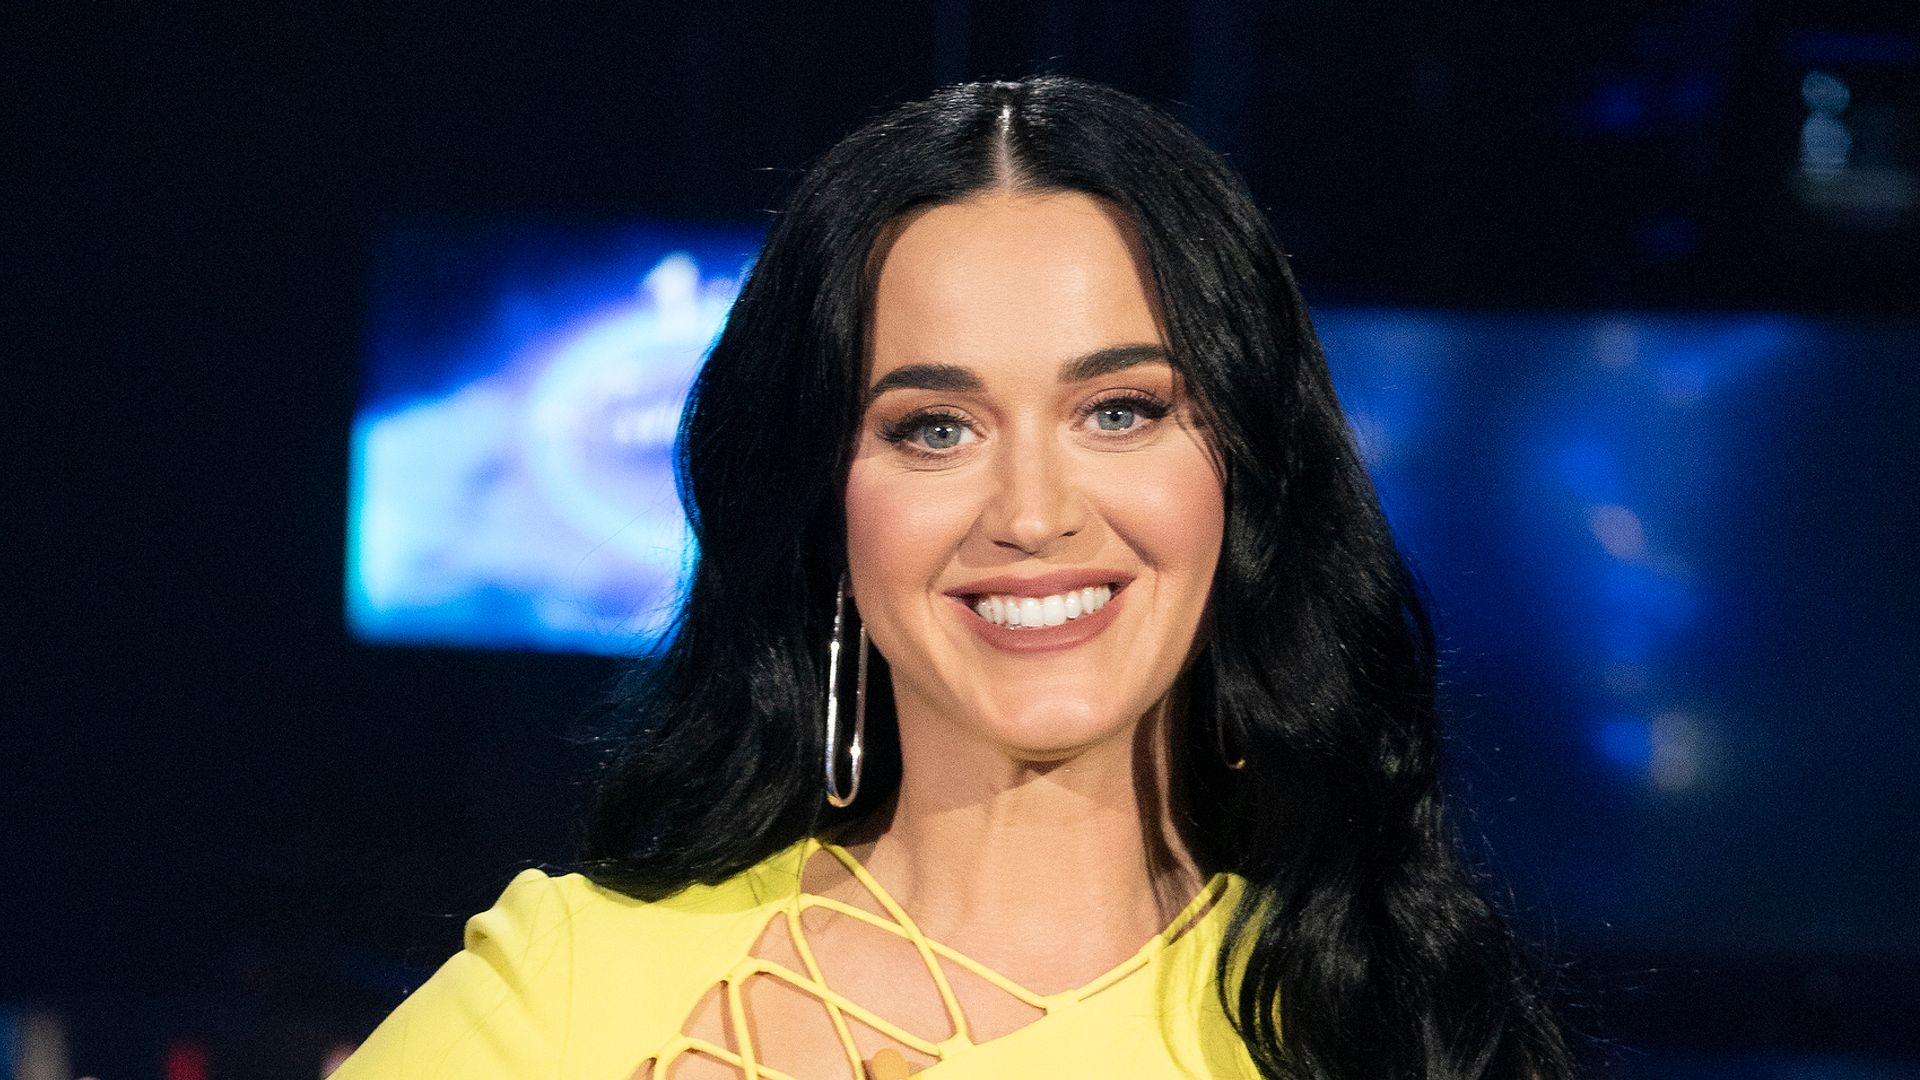 Katy Perry twins with lookalike mom in tiny tennis dress to play pickleball with famous opponents